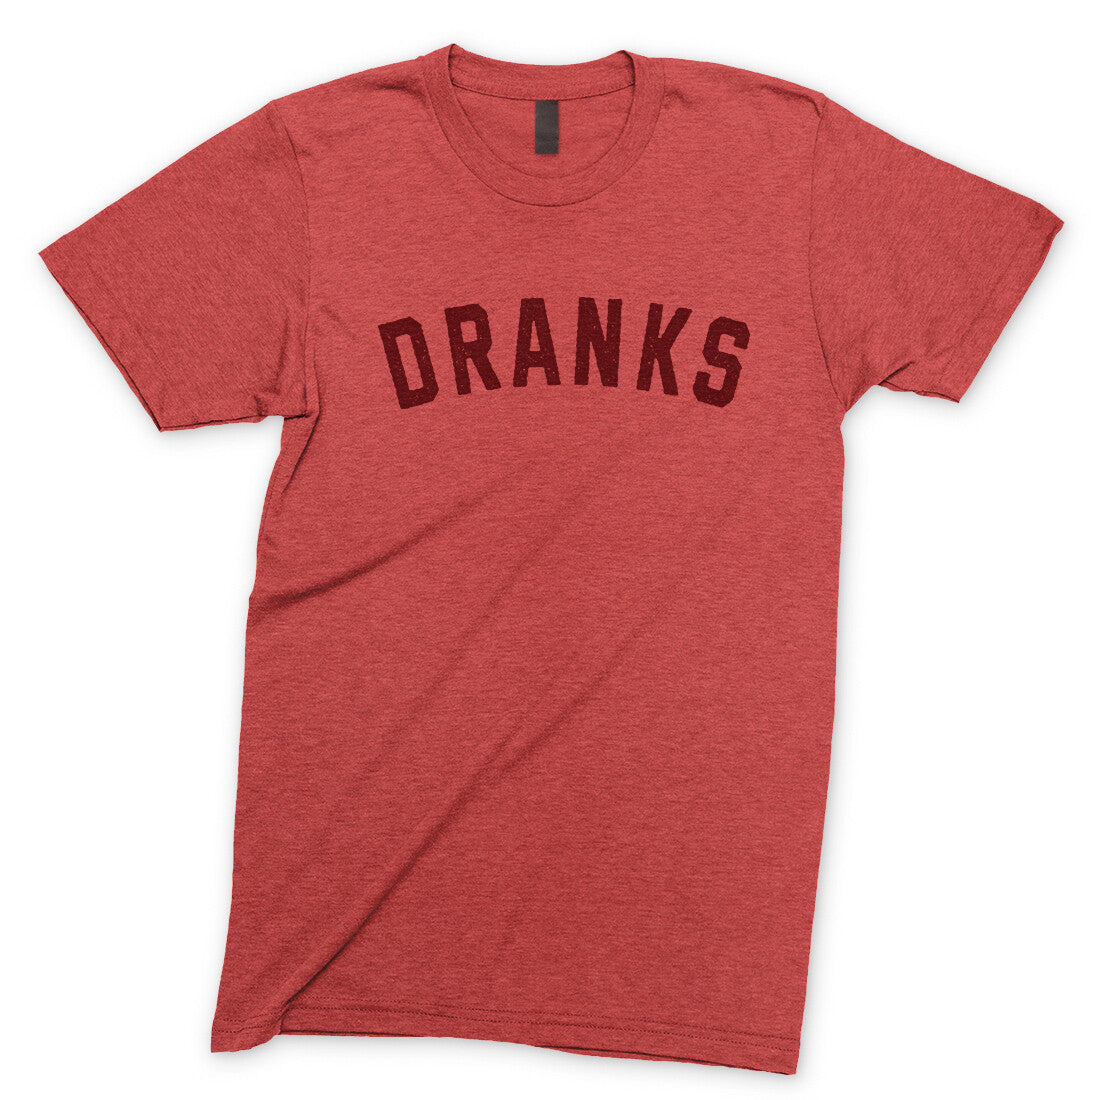 Dranks in Heather Red Color